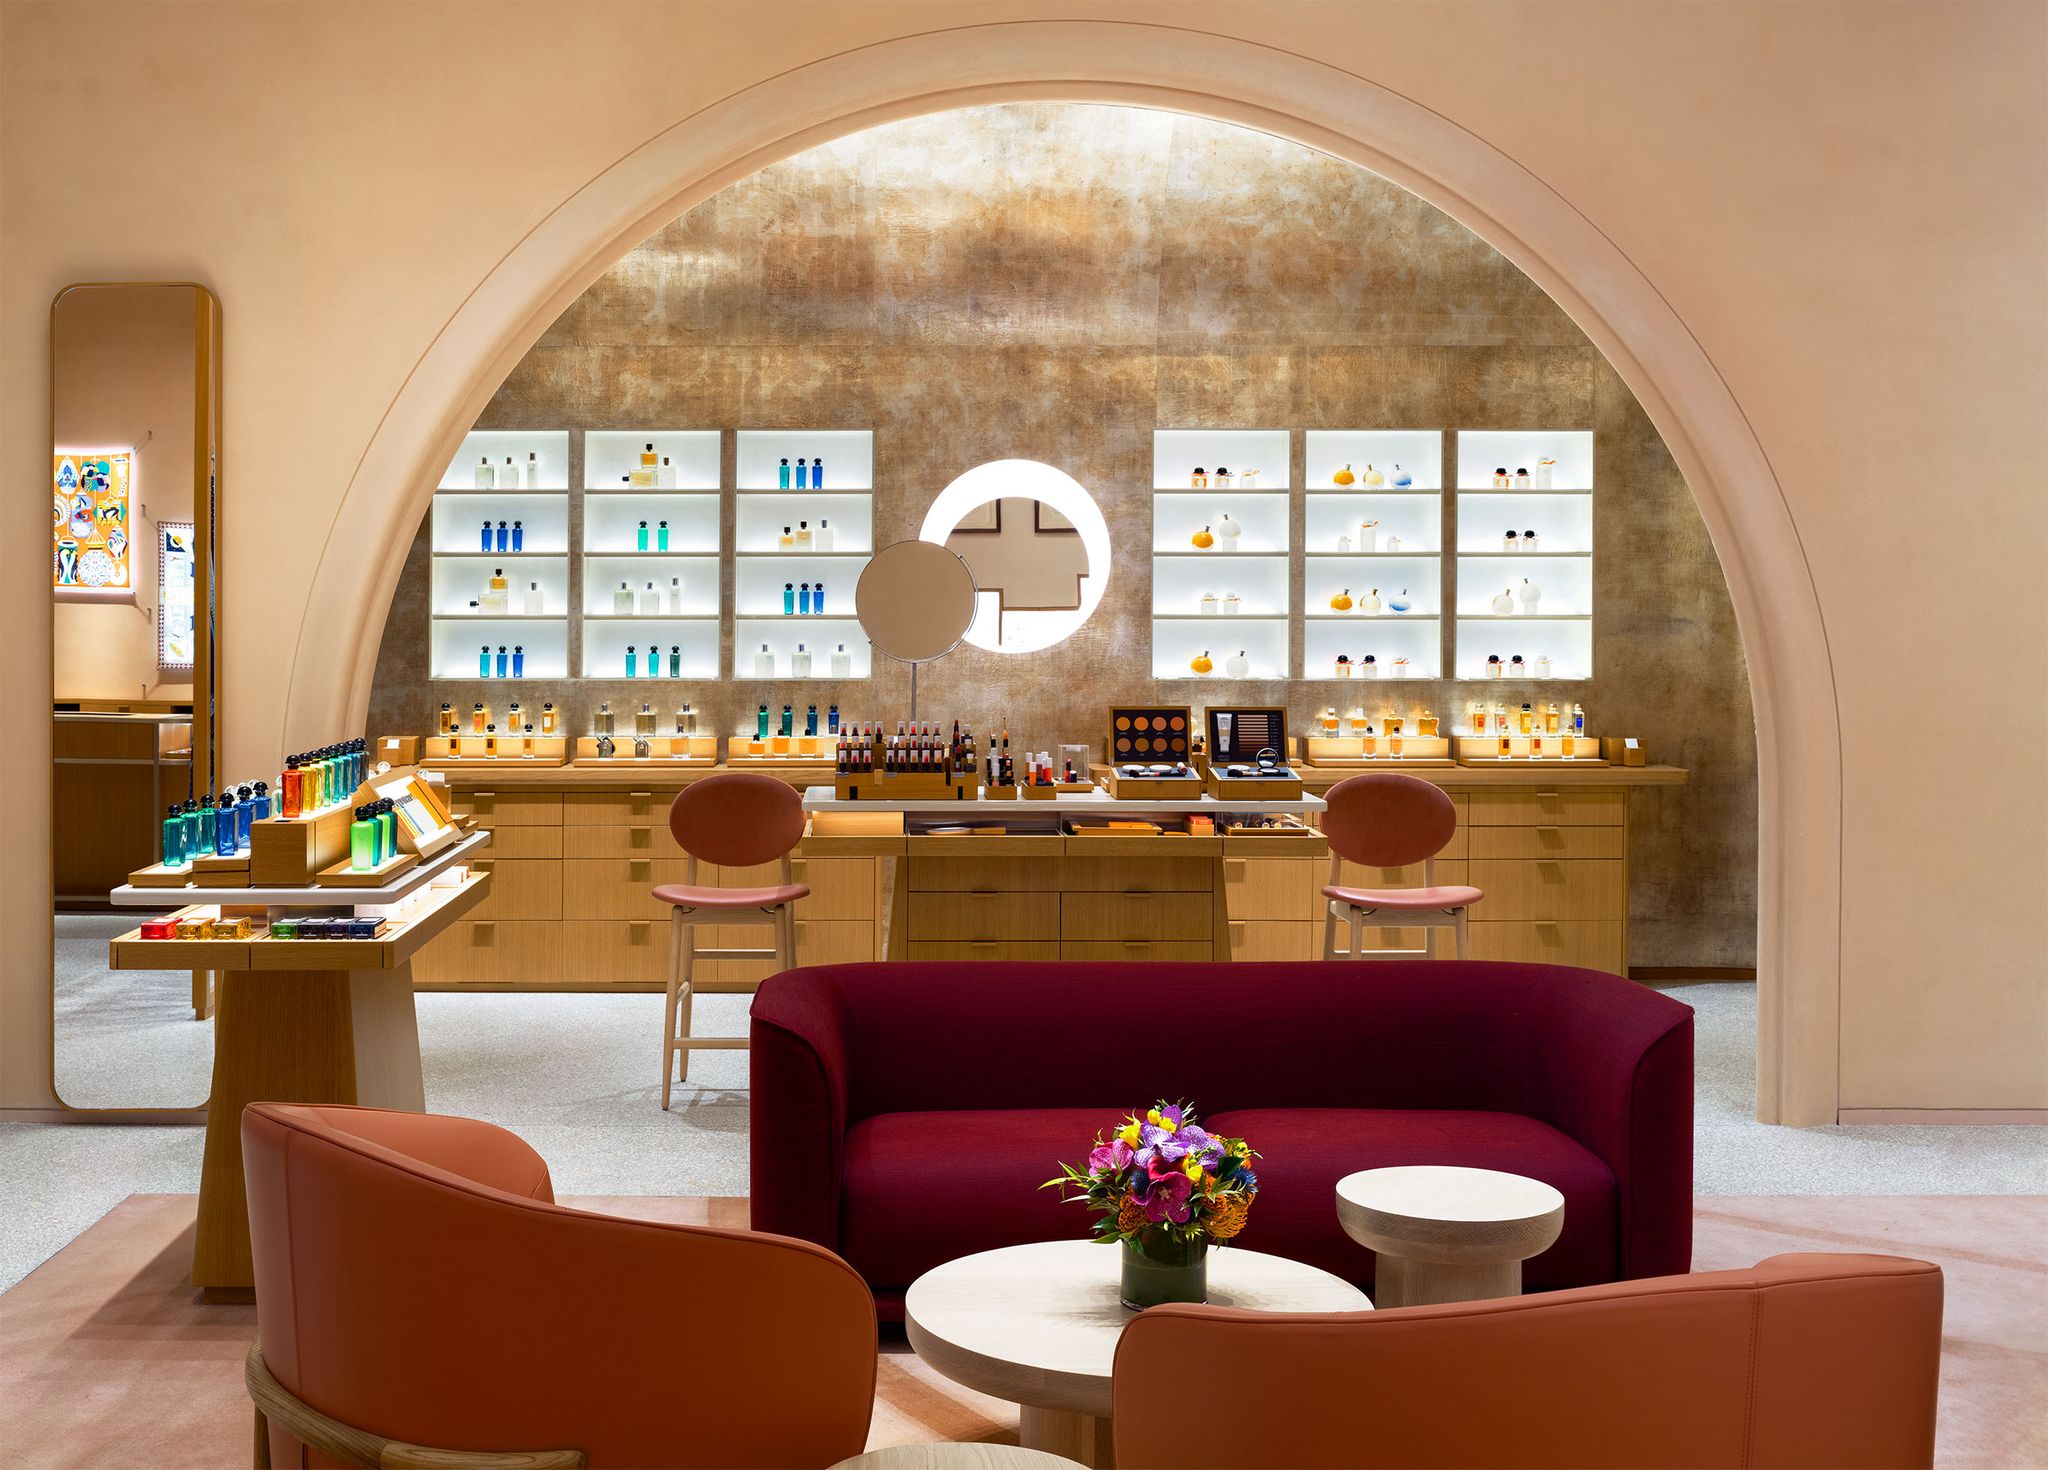 store interior with a large pink arch with glass cases and wooden drawers behind it and in the foreground is an intimate seating area with red and orangy pink velvet upholstered rounded sofa and rounded low armchairs